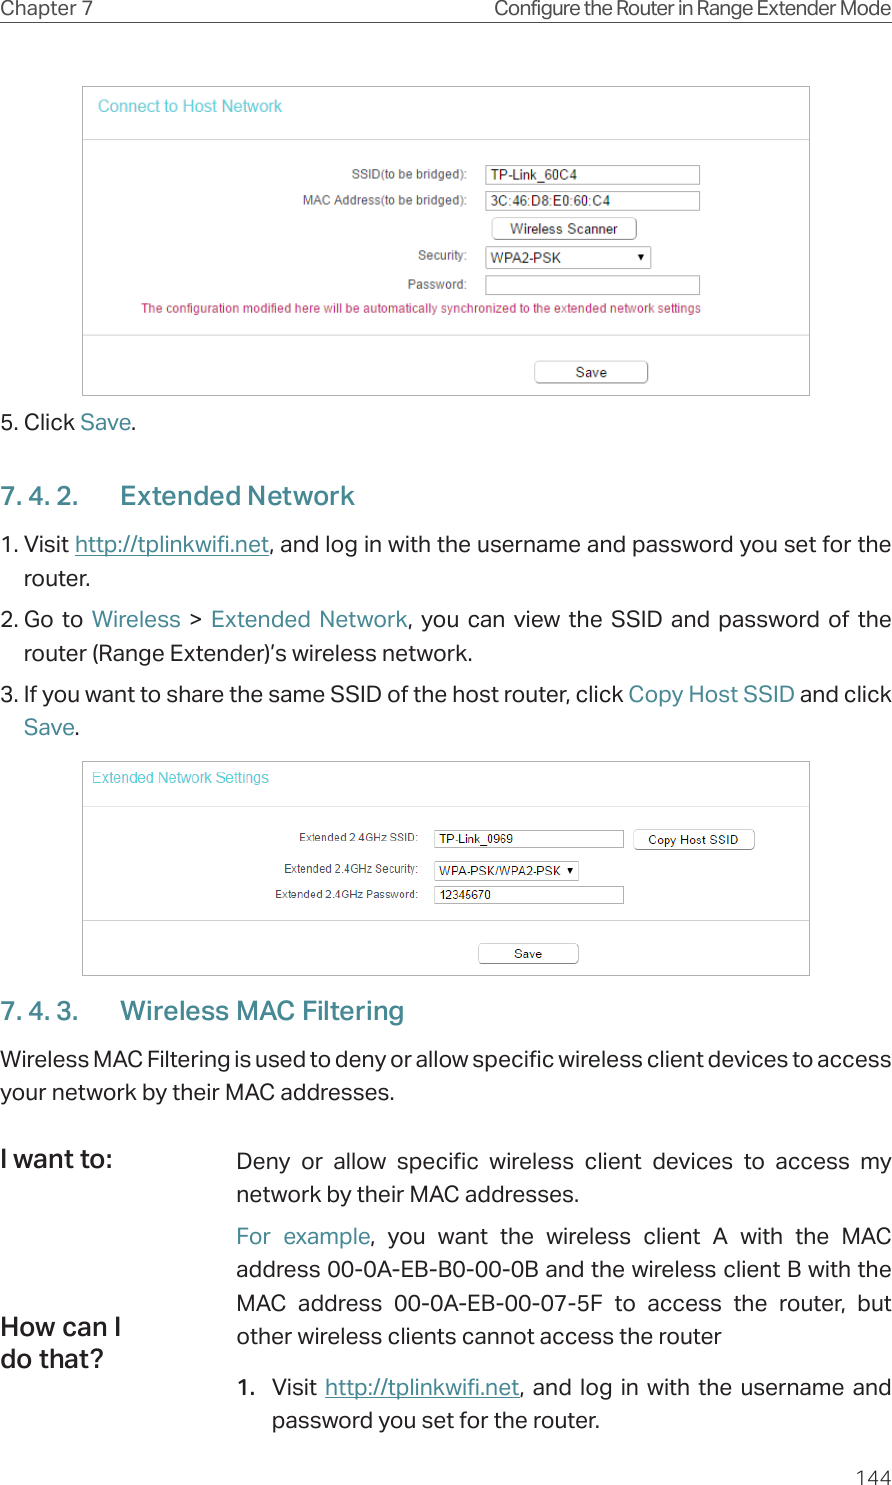 144Chapter 7 Configure the Router in Range Extender Mode5. Click Save.7. 4. 2.  Extended Network1. Visit http://tplinkwifi.net, and log in with the username and password you set for the router.2. Go to Wireless &gt; Extended Network, you can view the SSID and password of the router (Range Extender)’s wireless network. 3. If you want to share the same SSID of the host router, click Copy Host SSID and click Save.7. 4. 3.  Wireless MAC FilteringWireless MAC Filtering is used to deny or allow specific wireless client devices to access your network by their MAC addresses.Deny or allow specific wireless client devices to access my network by their MAC addresses.For example, you want the wireless client A with the MAC address 00-0A-EB-B0-00-0B and the wireless client B with the MAC address 00-0A-EB-00-07-5F to access the router, but other wireless clients cannot access the router1.  Visit  http://tplinkwifi.net, and log in with the username and password you set for the router.I want to:How can I do that?